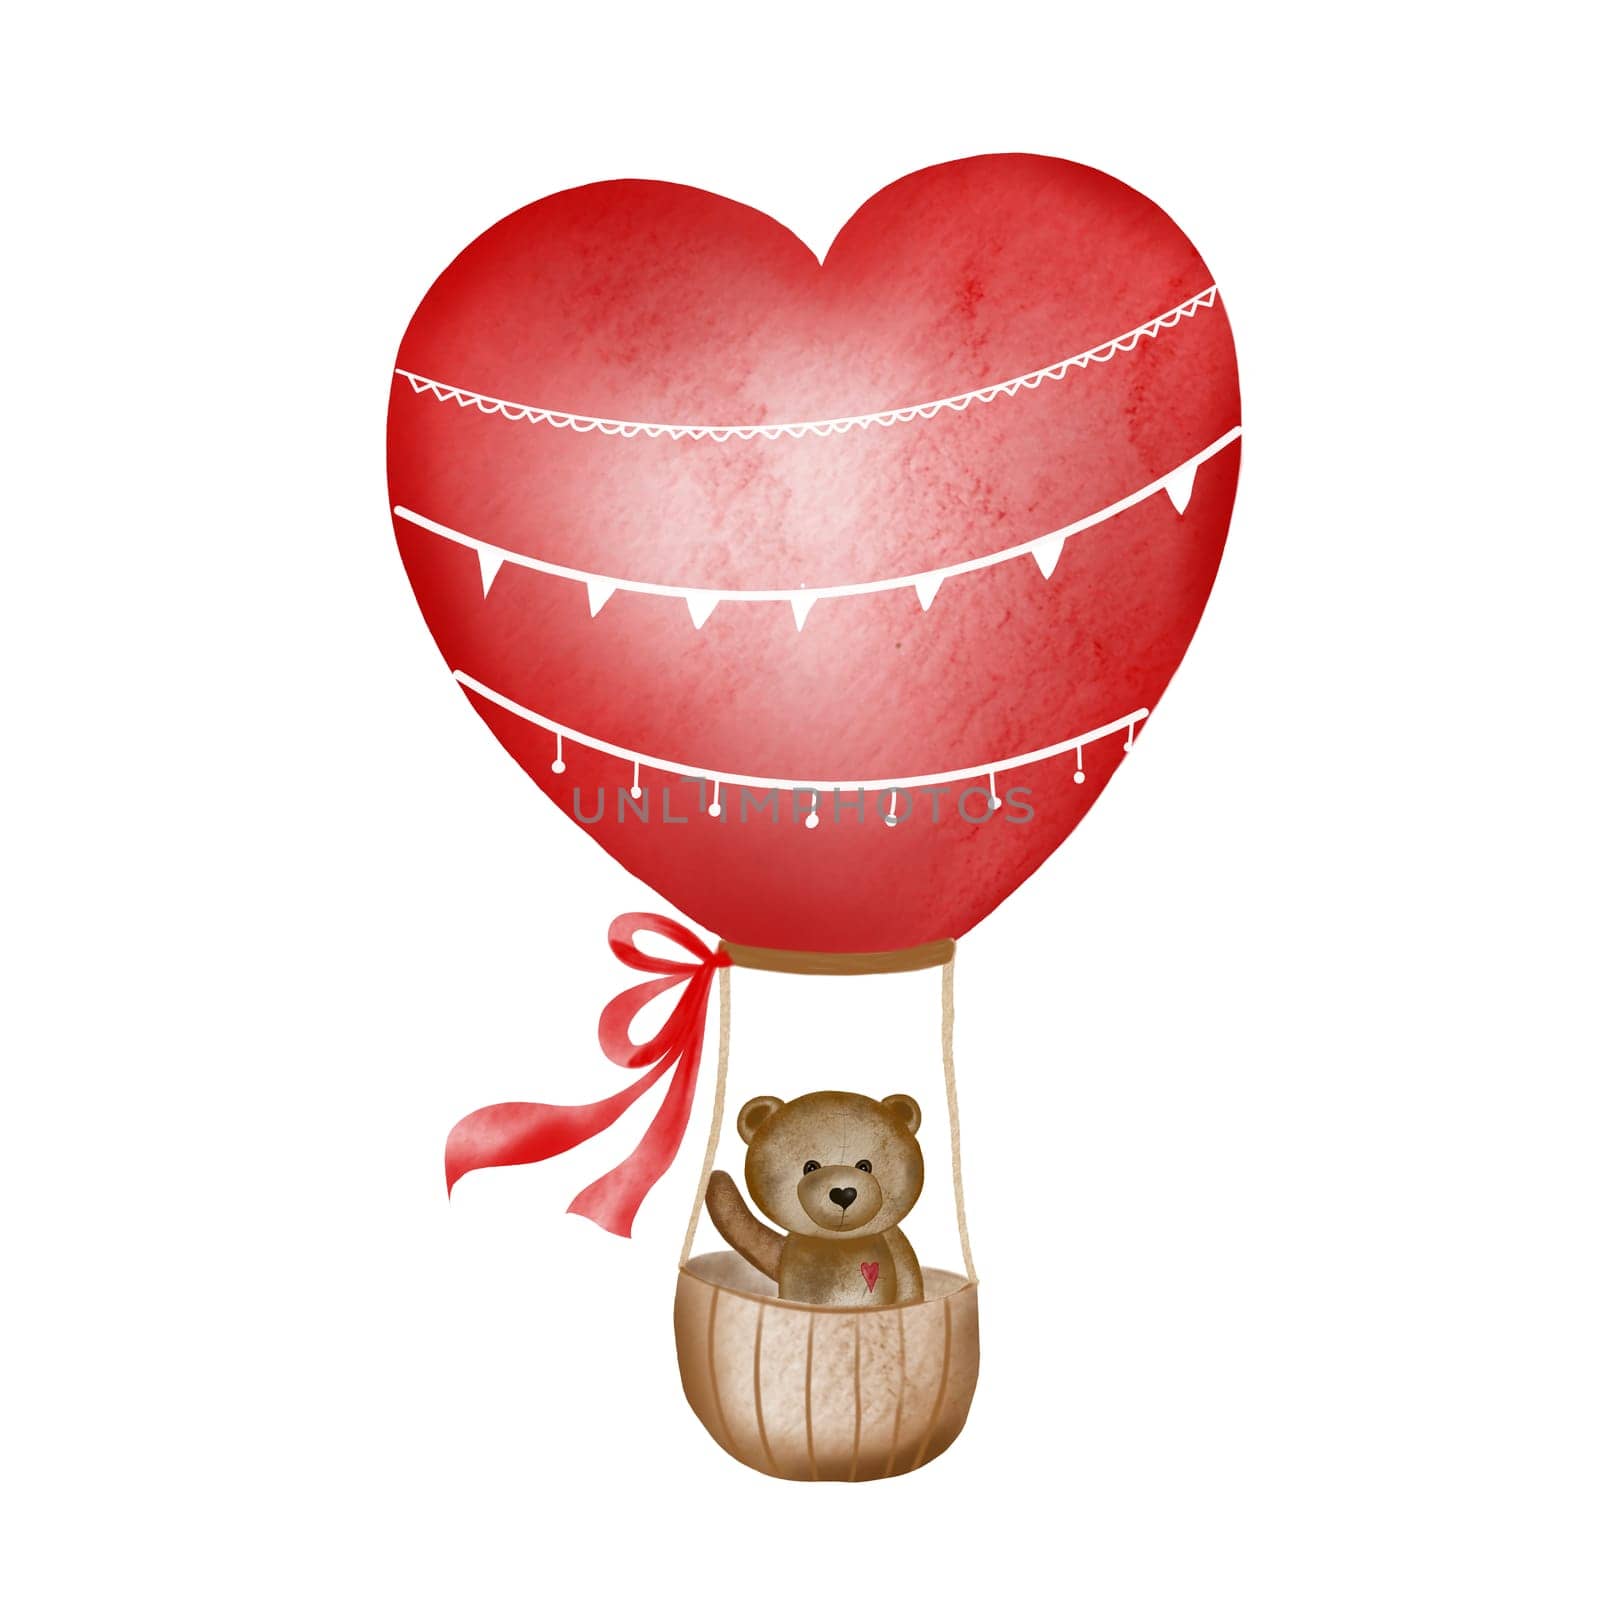 Watercolor drawing of a cute bear in a heart-shaped air balloon. Nice isolate on a white background for printing on valentine's day cards and invitations. Valentine's card. High quality illustration